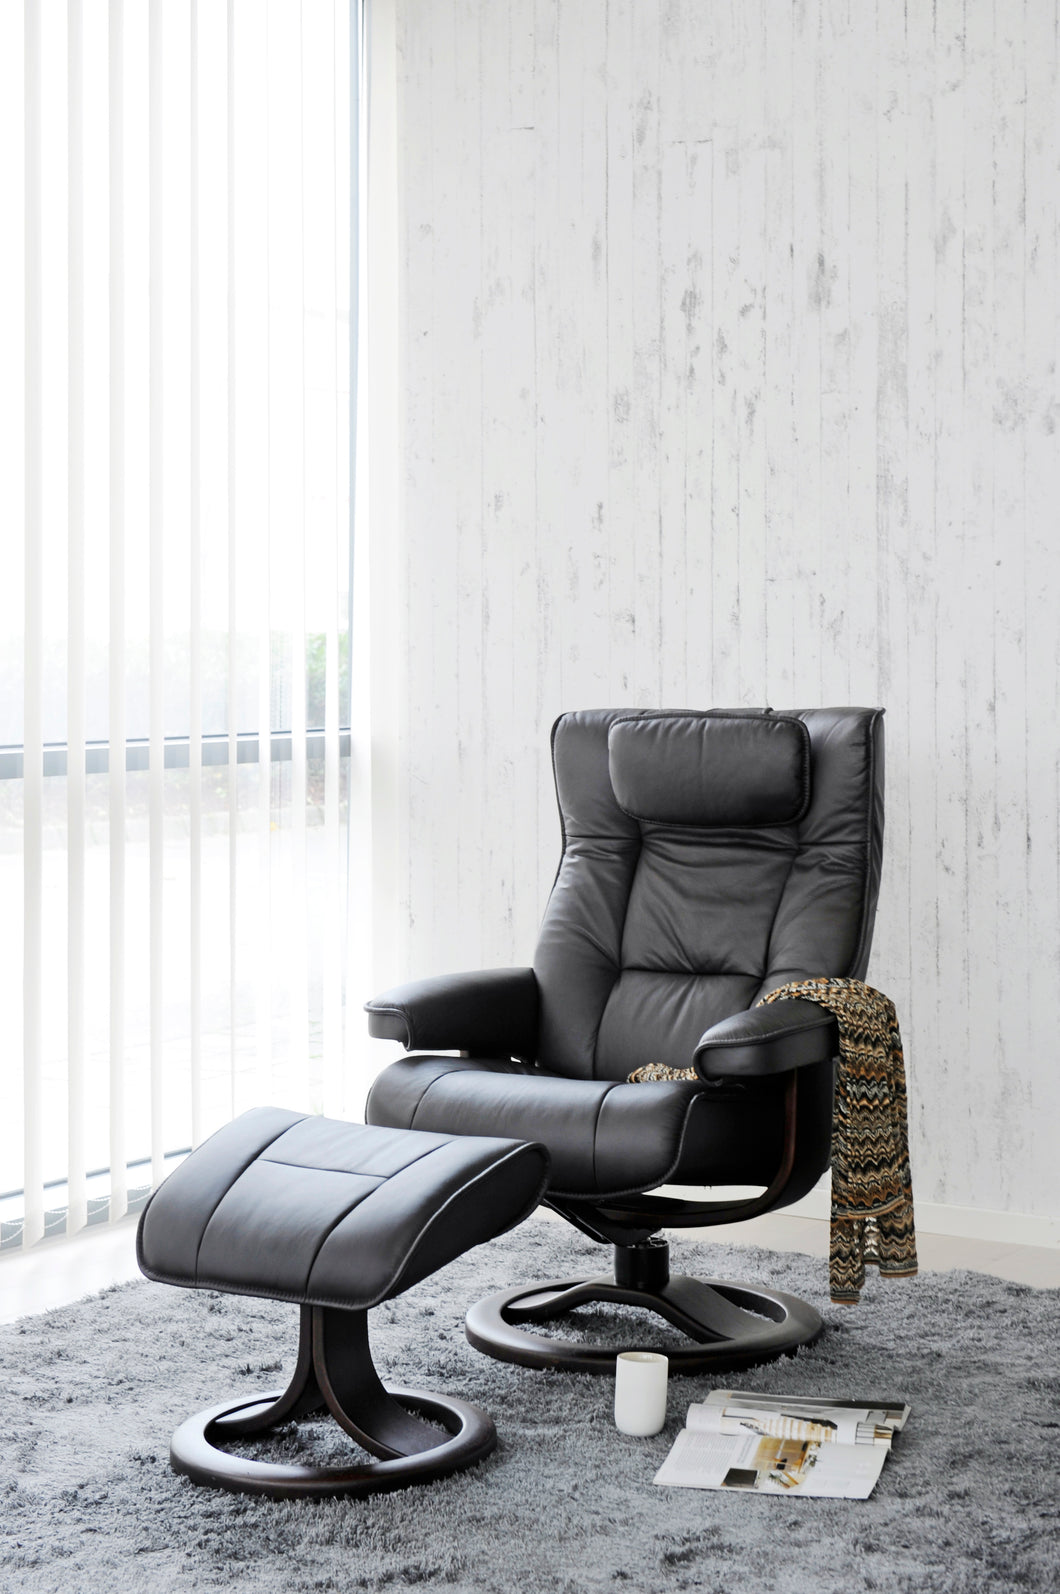 Mustang recliner chair with footstool